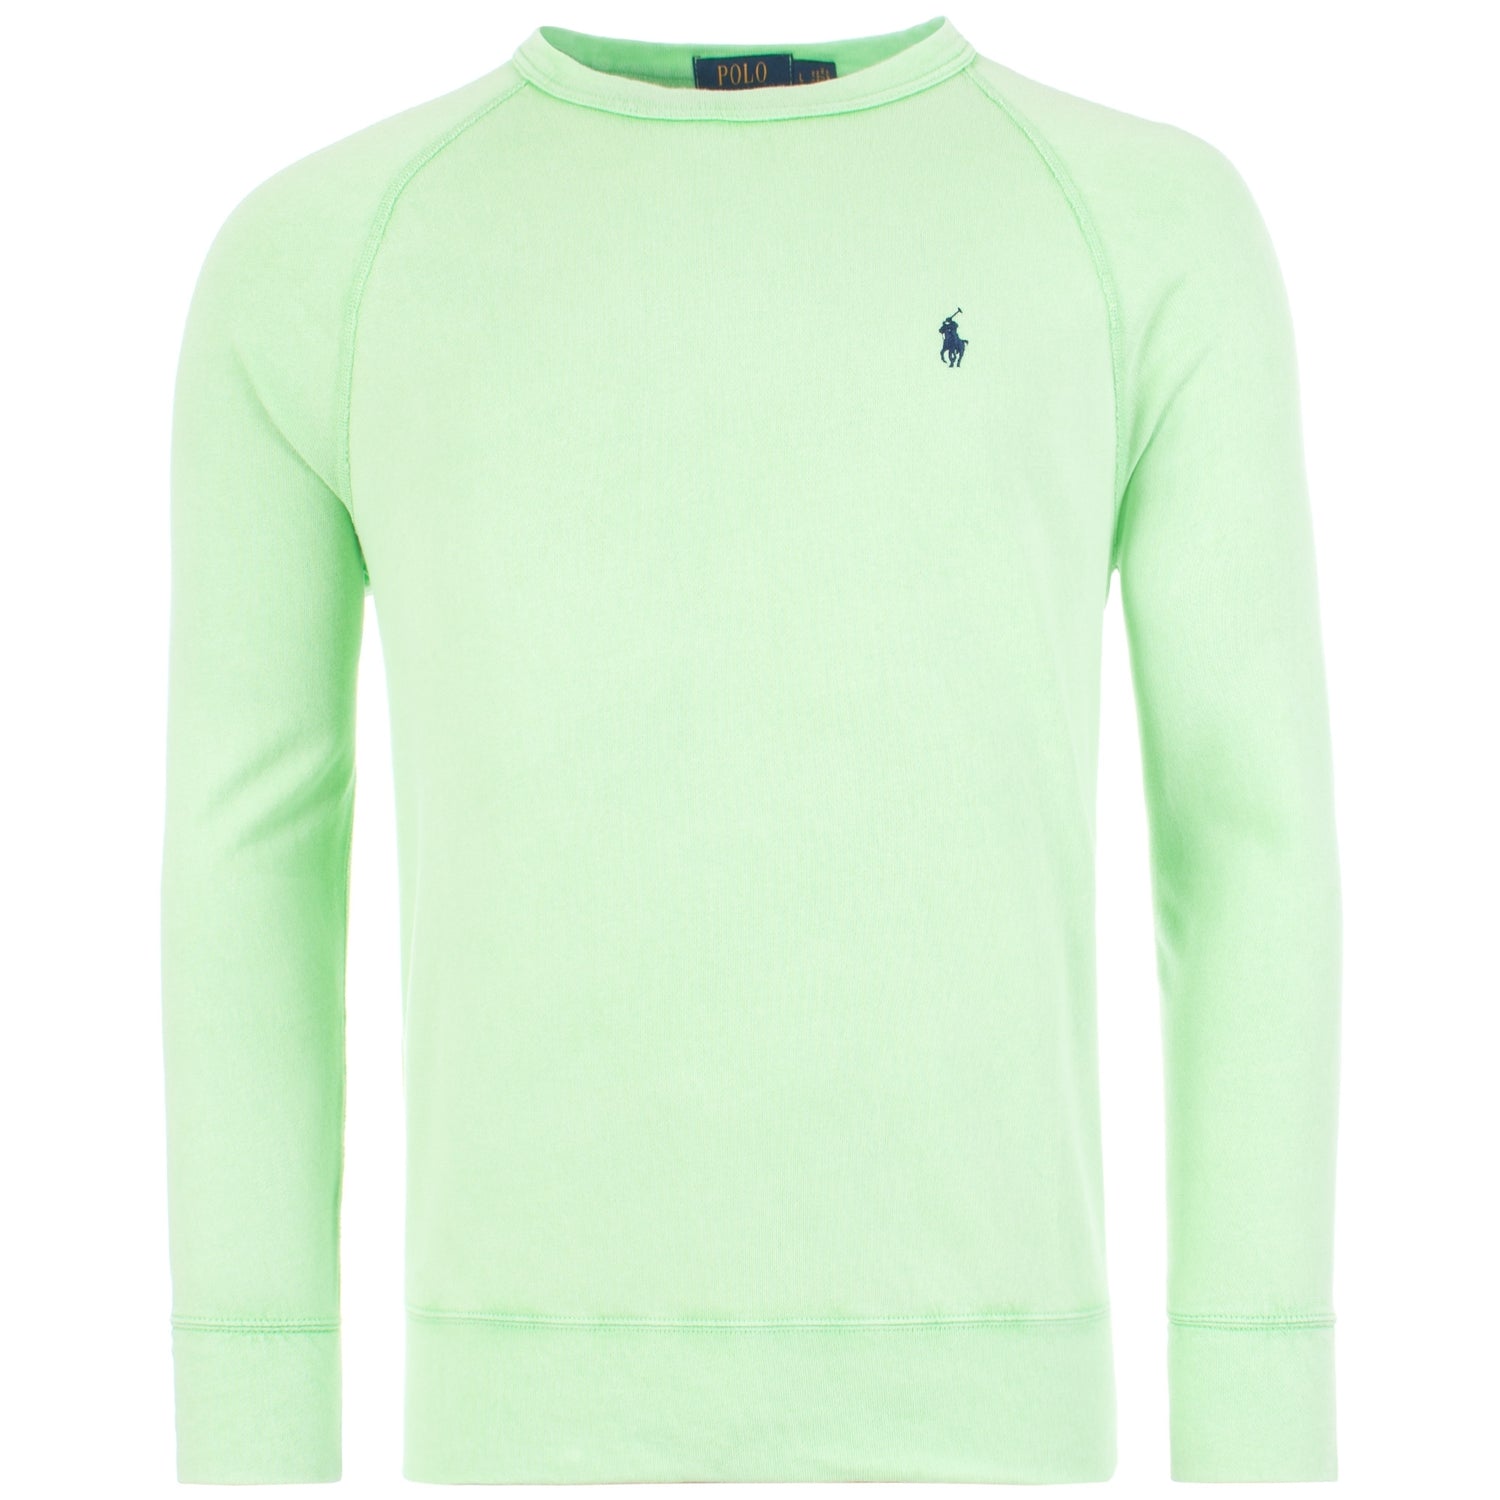 Washed Cotton Spa Terry Sweatshirt Lime, Polo Ralph Lauren